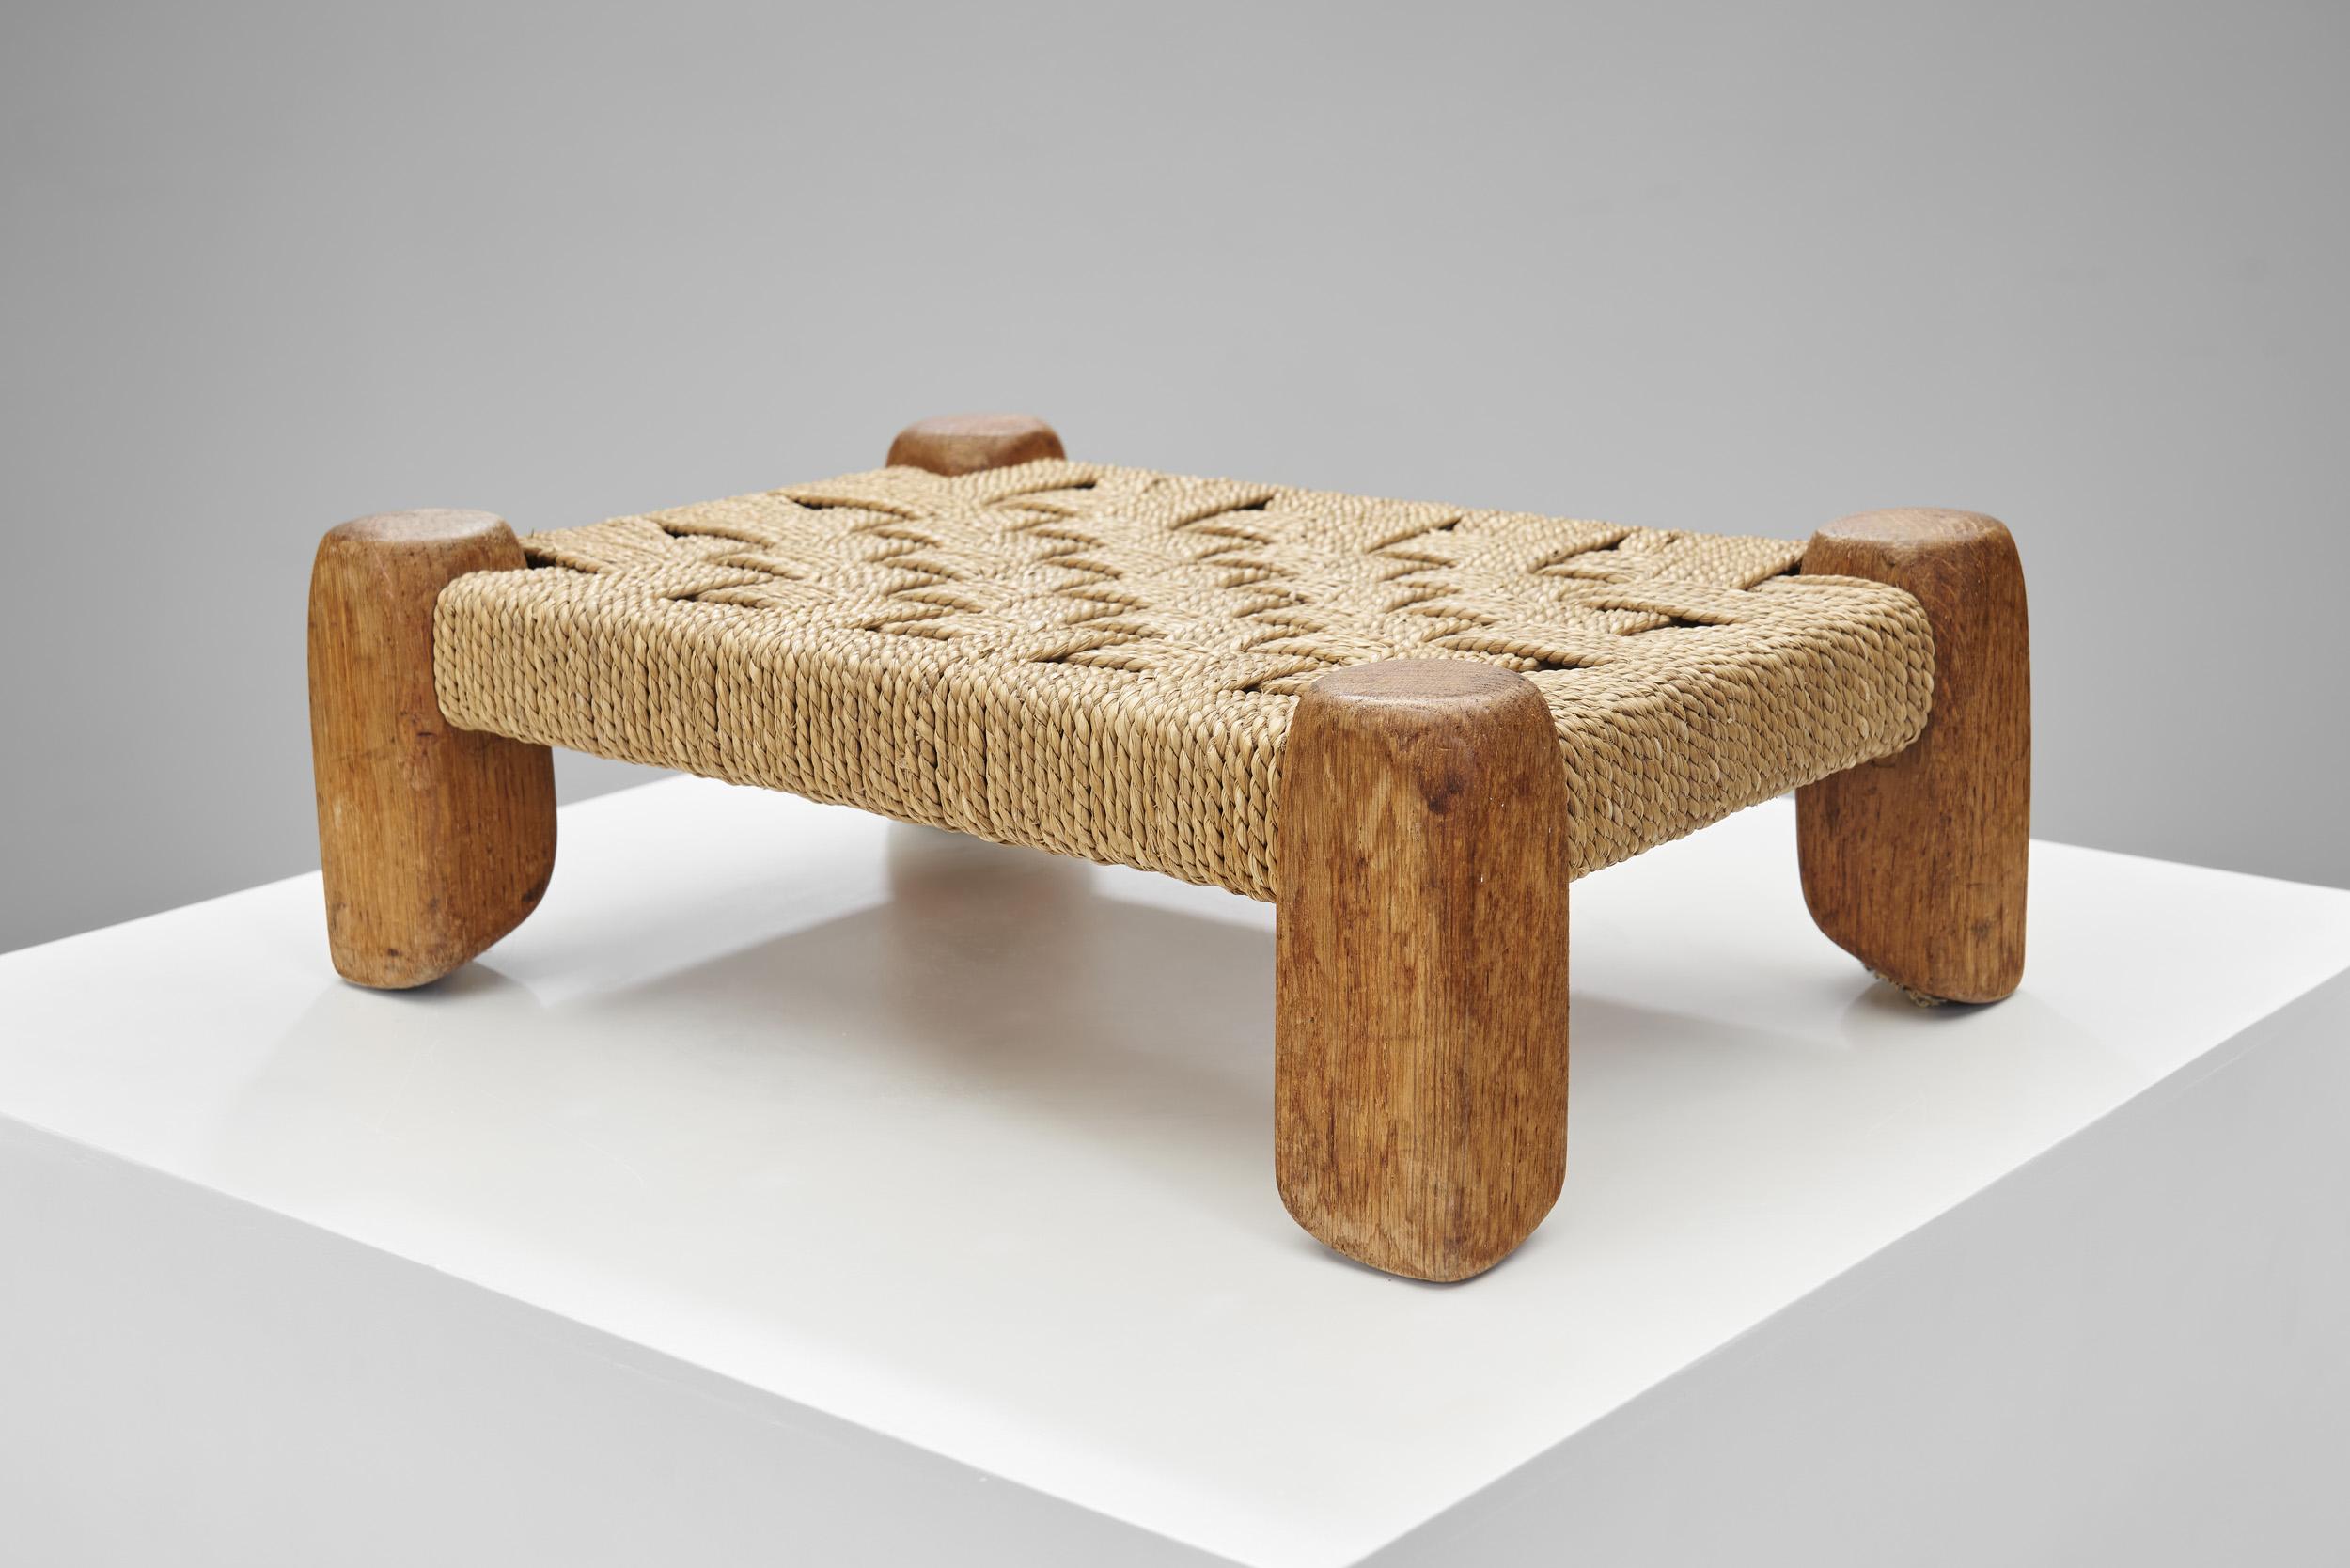 Woven Rush and Wood Stool, Europe ca 1950s For Sale 4